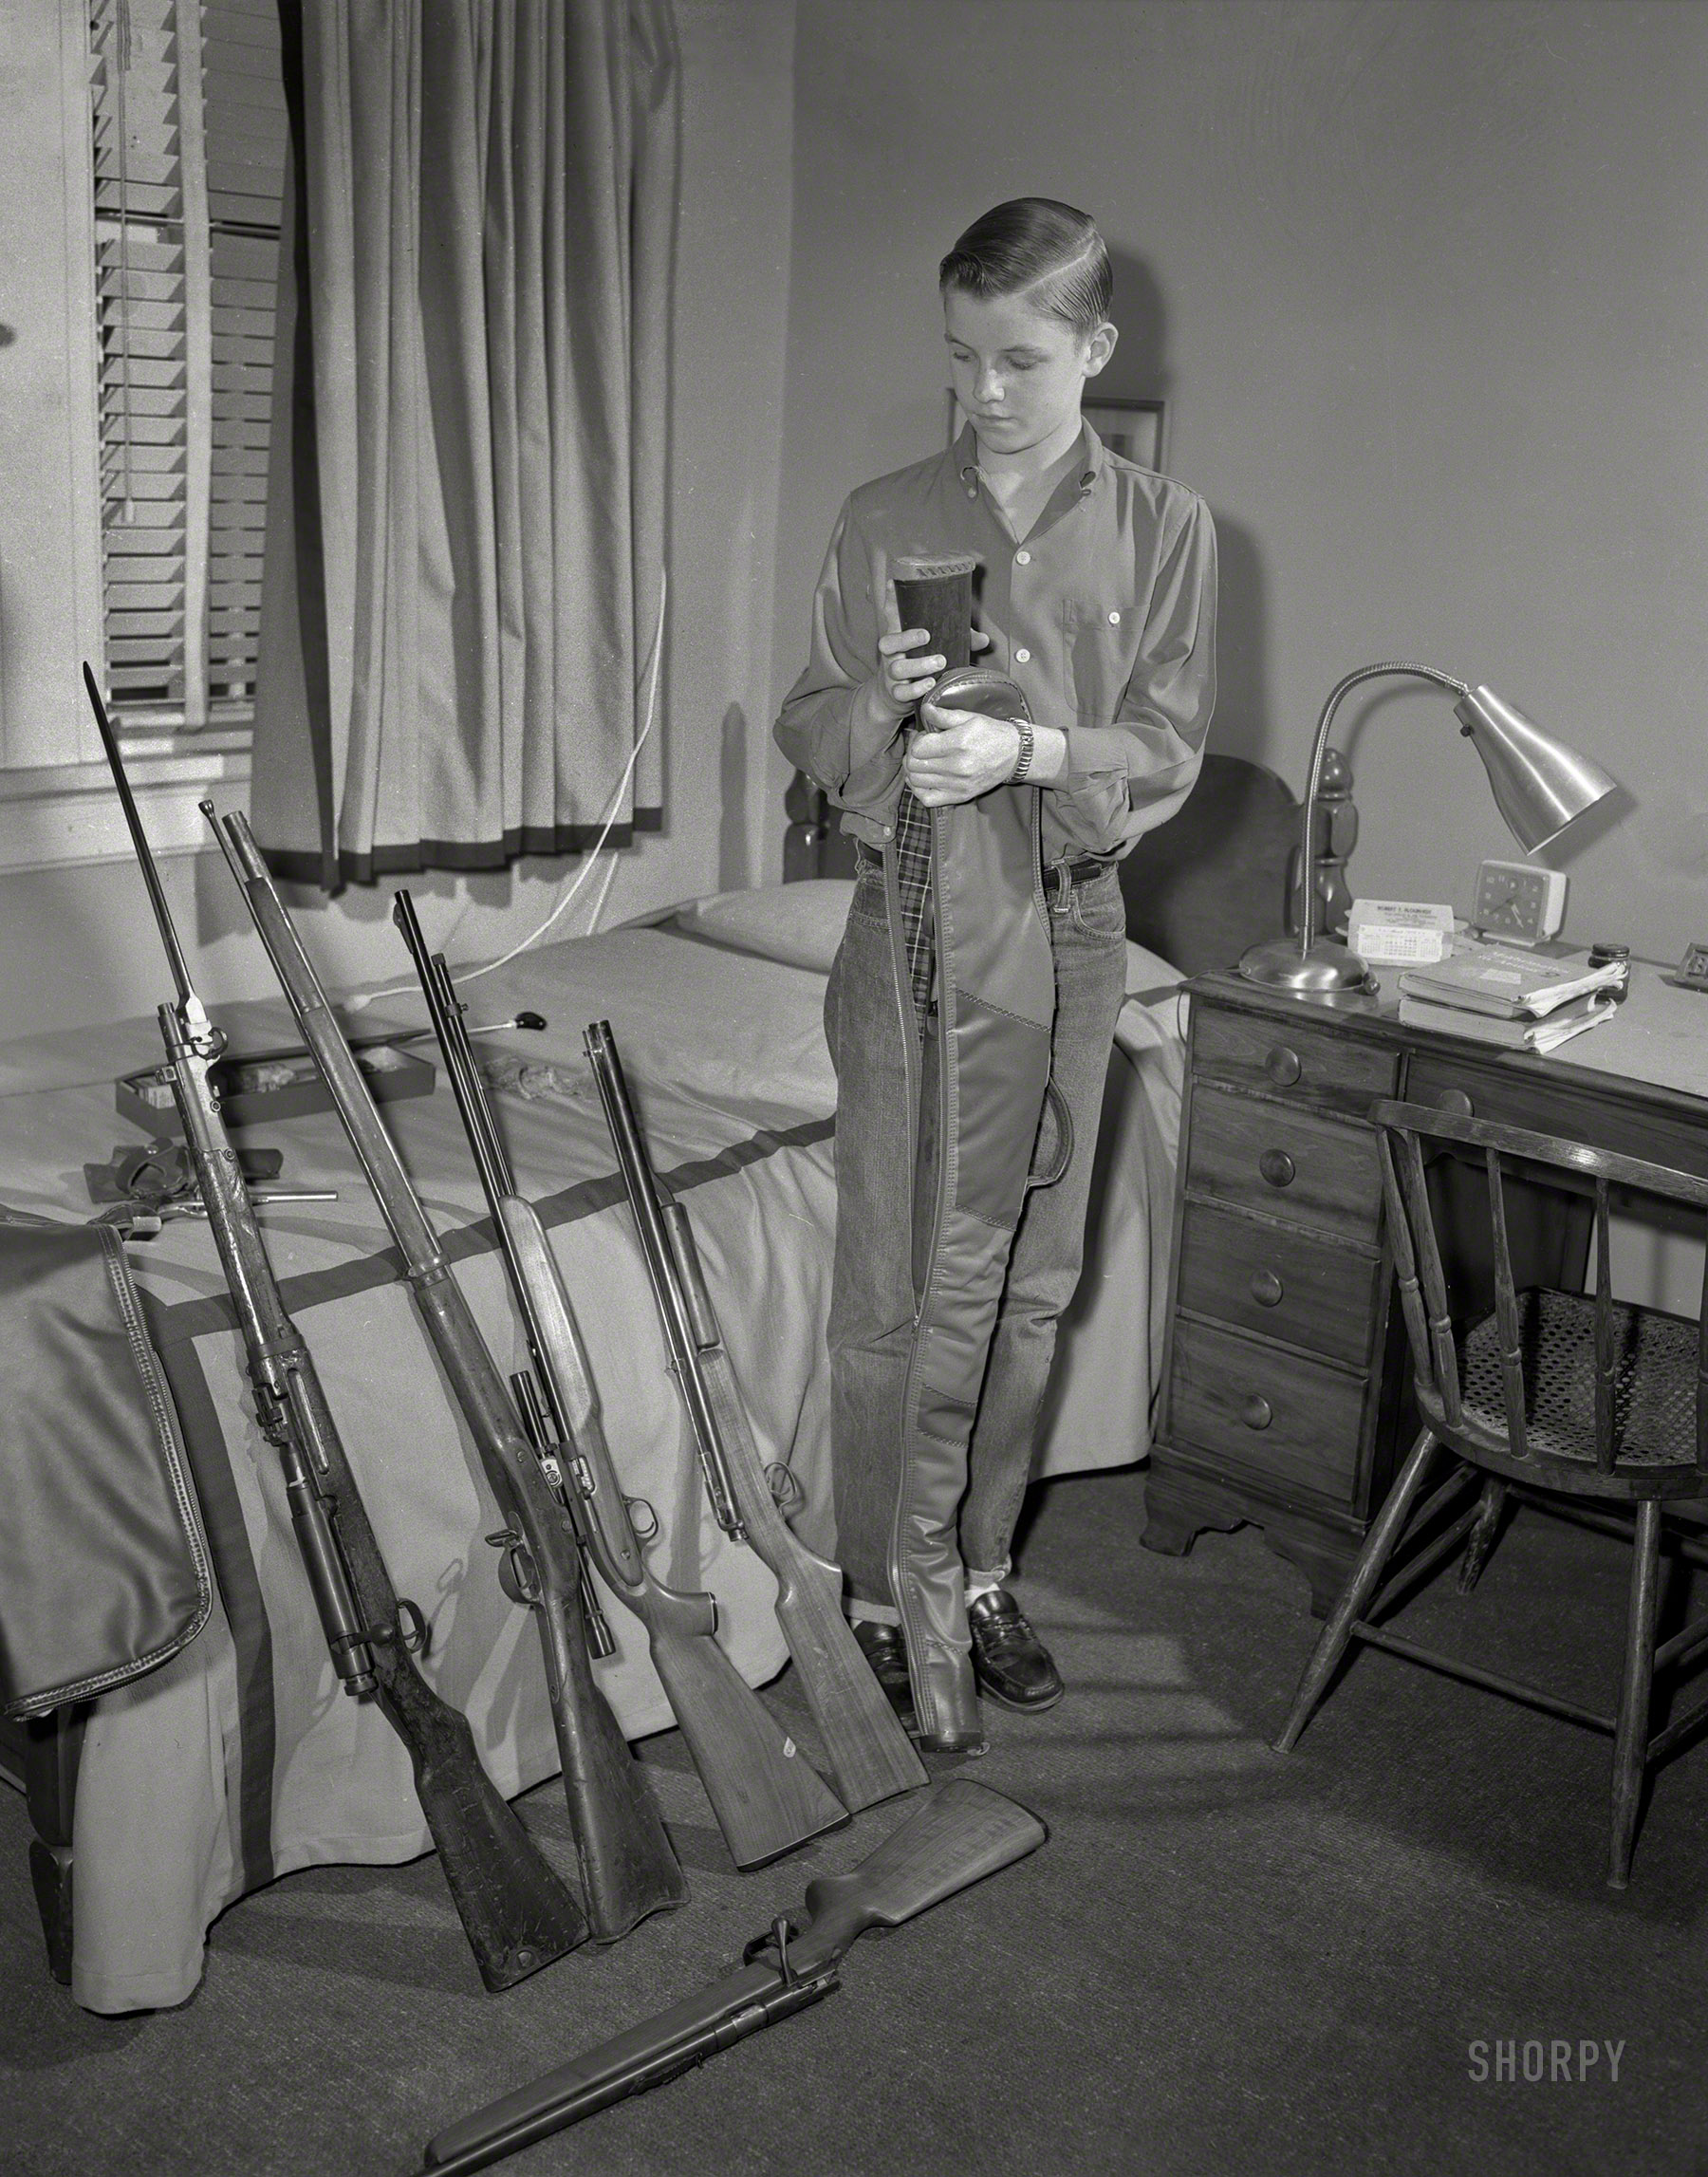 From Columbus, Georgia, or vicinity circa 1959 comes this uncaptioned shot of the young marksman last seen here. 4x5 inch acetate negative. View full size.